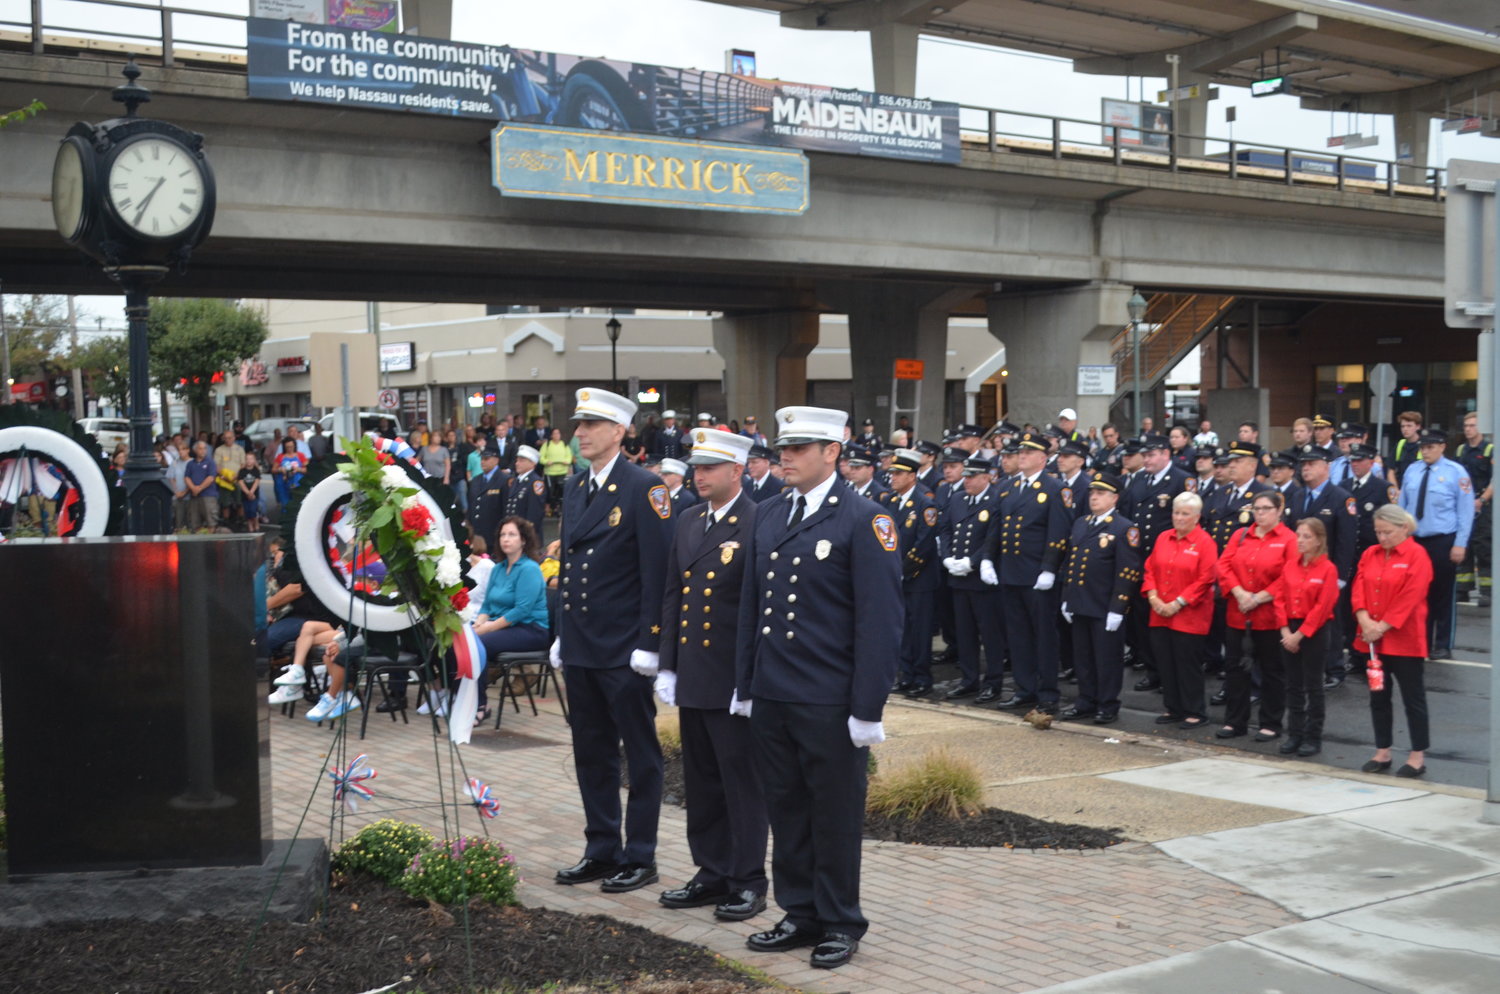 Wreathes in honor of the Merrick department’s ex-chief Ronnie Gies and ex-captain Bryan Sweeney are laid out every year.